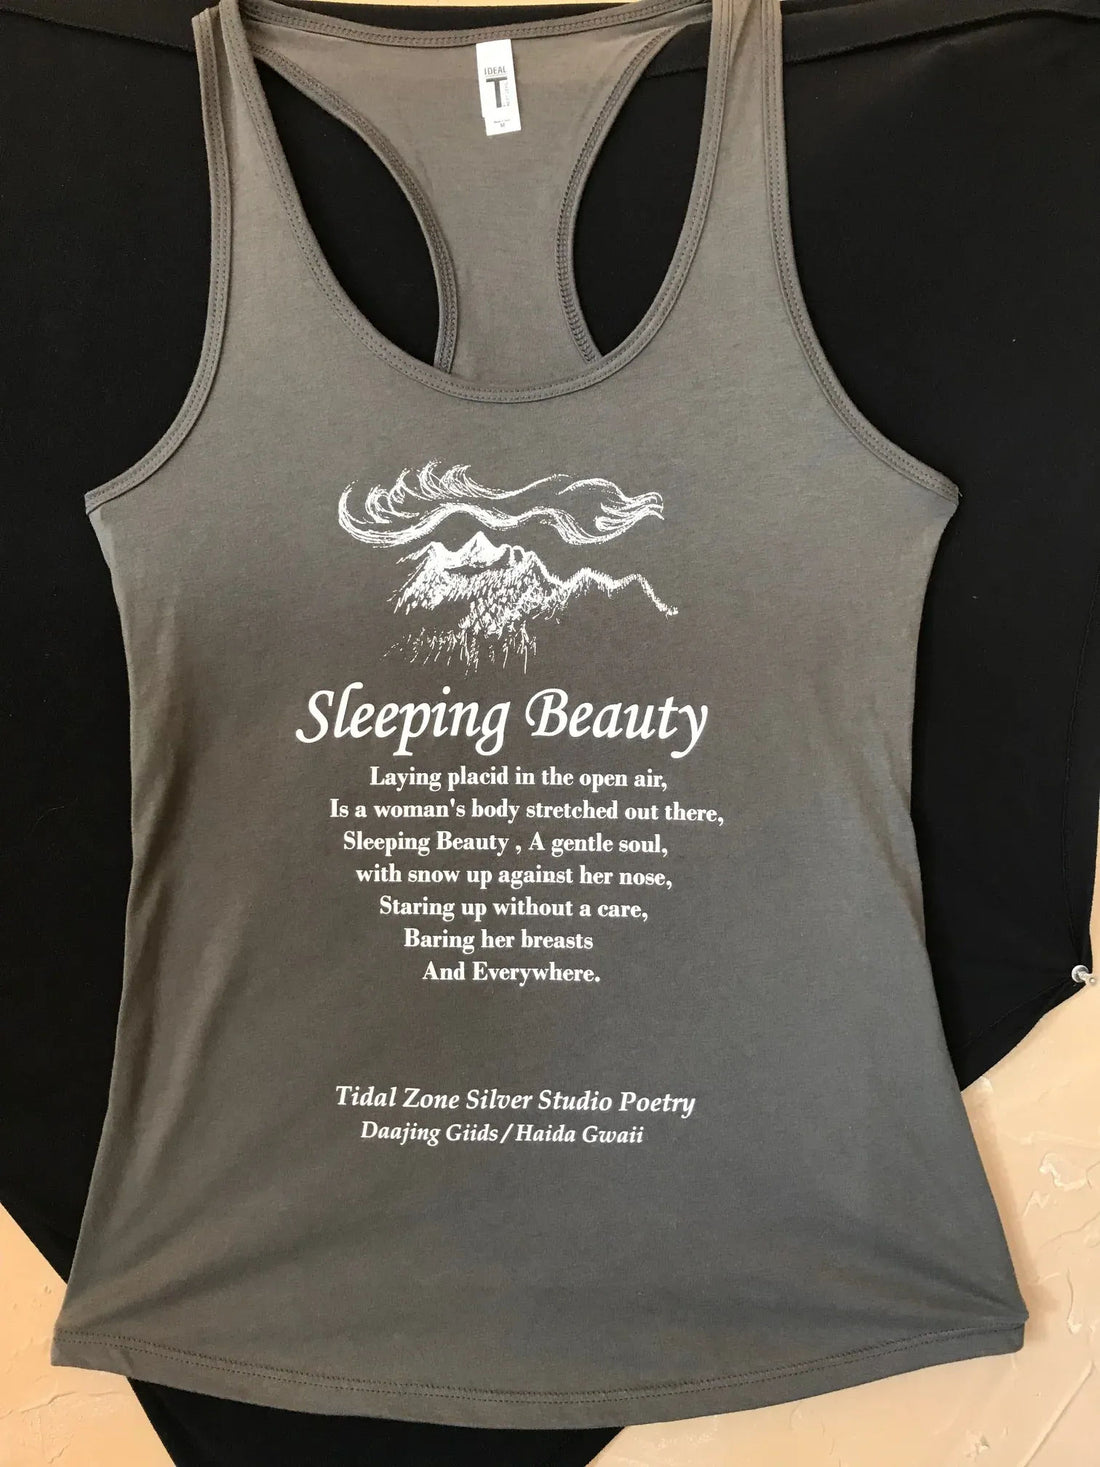 Tsuga Exclusive: Habitat Tees & Tank Tops from Our Women's Fashion